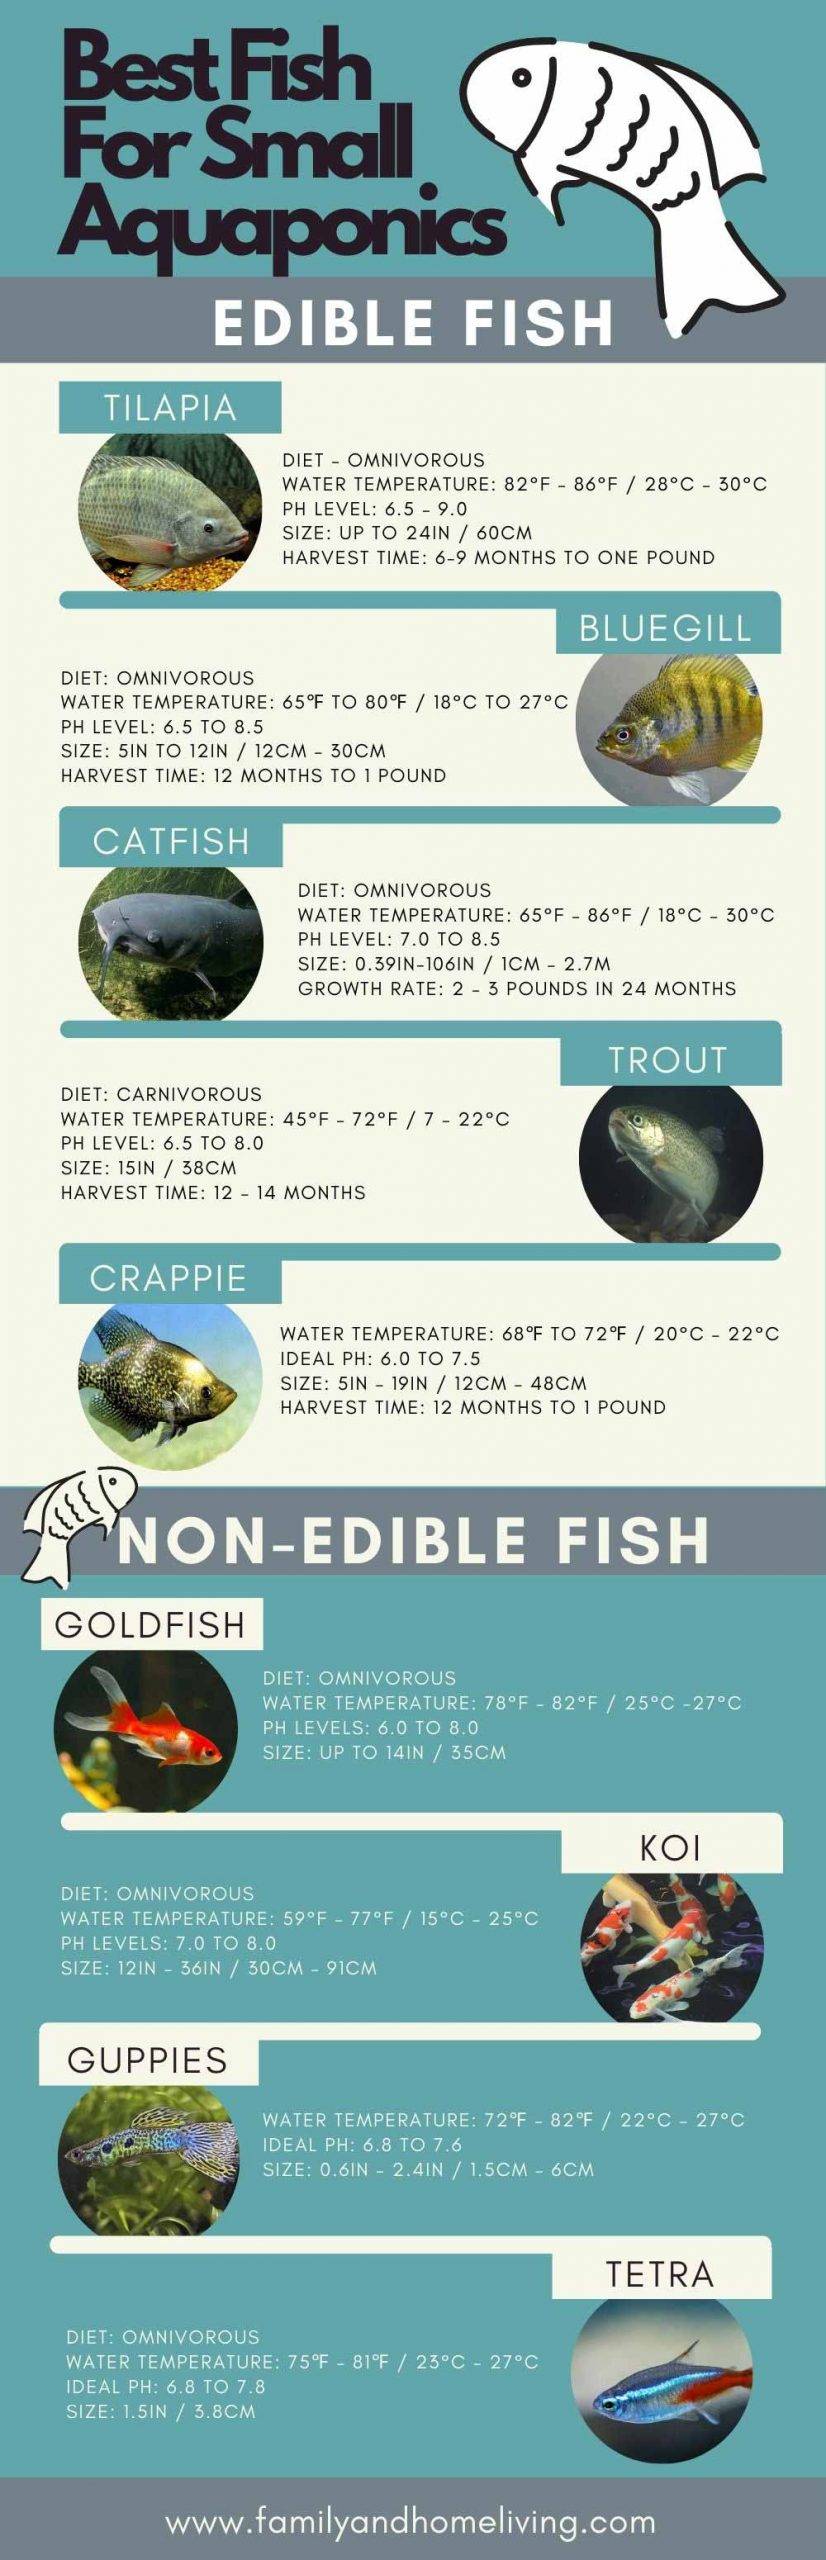 Infographic - Best Fish For Small Aquaponics